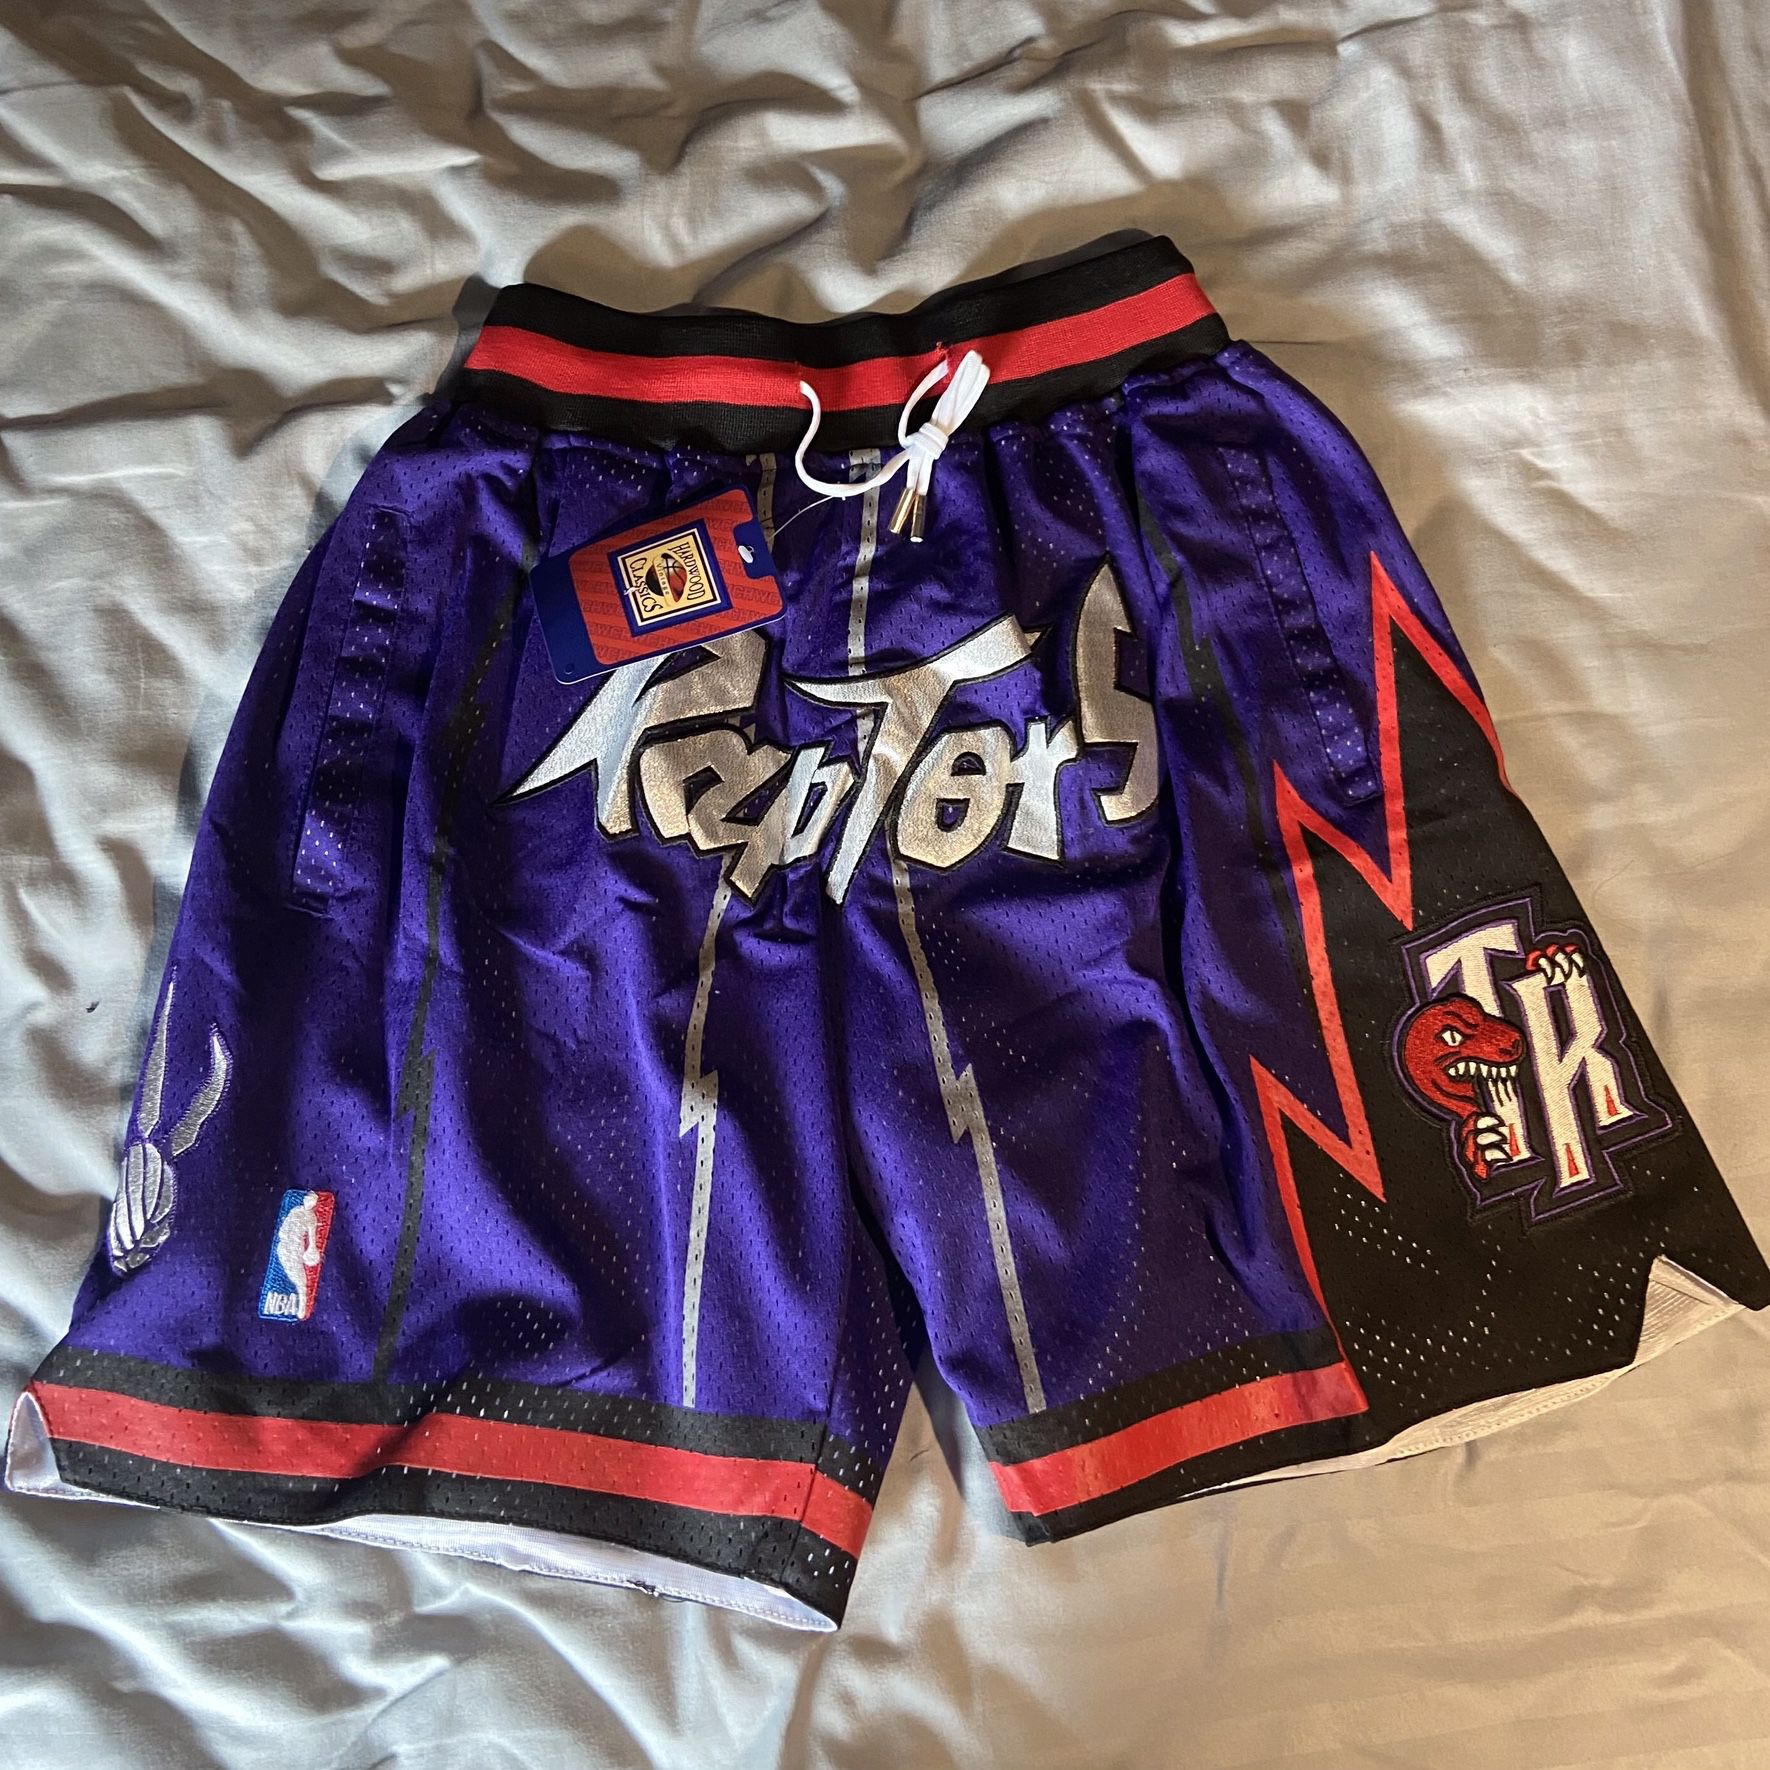 Urban Auctions - 2 PAIRS OF TORONTO RAPTORS SHORTS - VINTAGE NIKE & JUST DON  - SIZE L